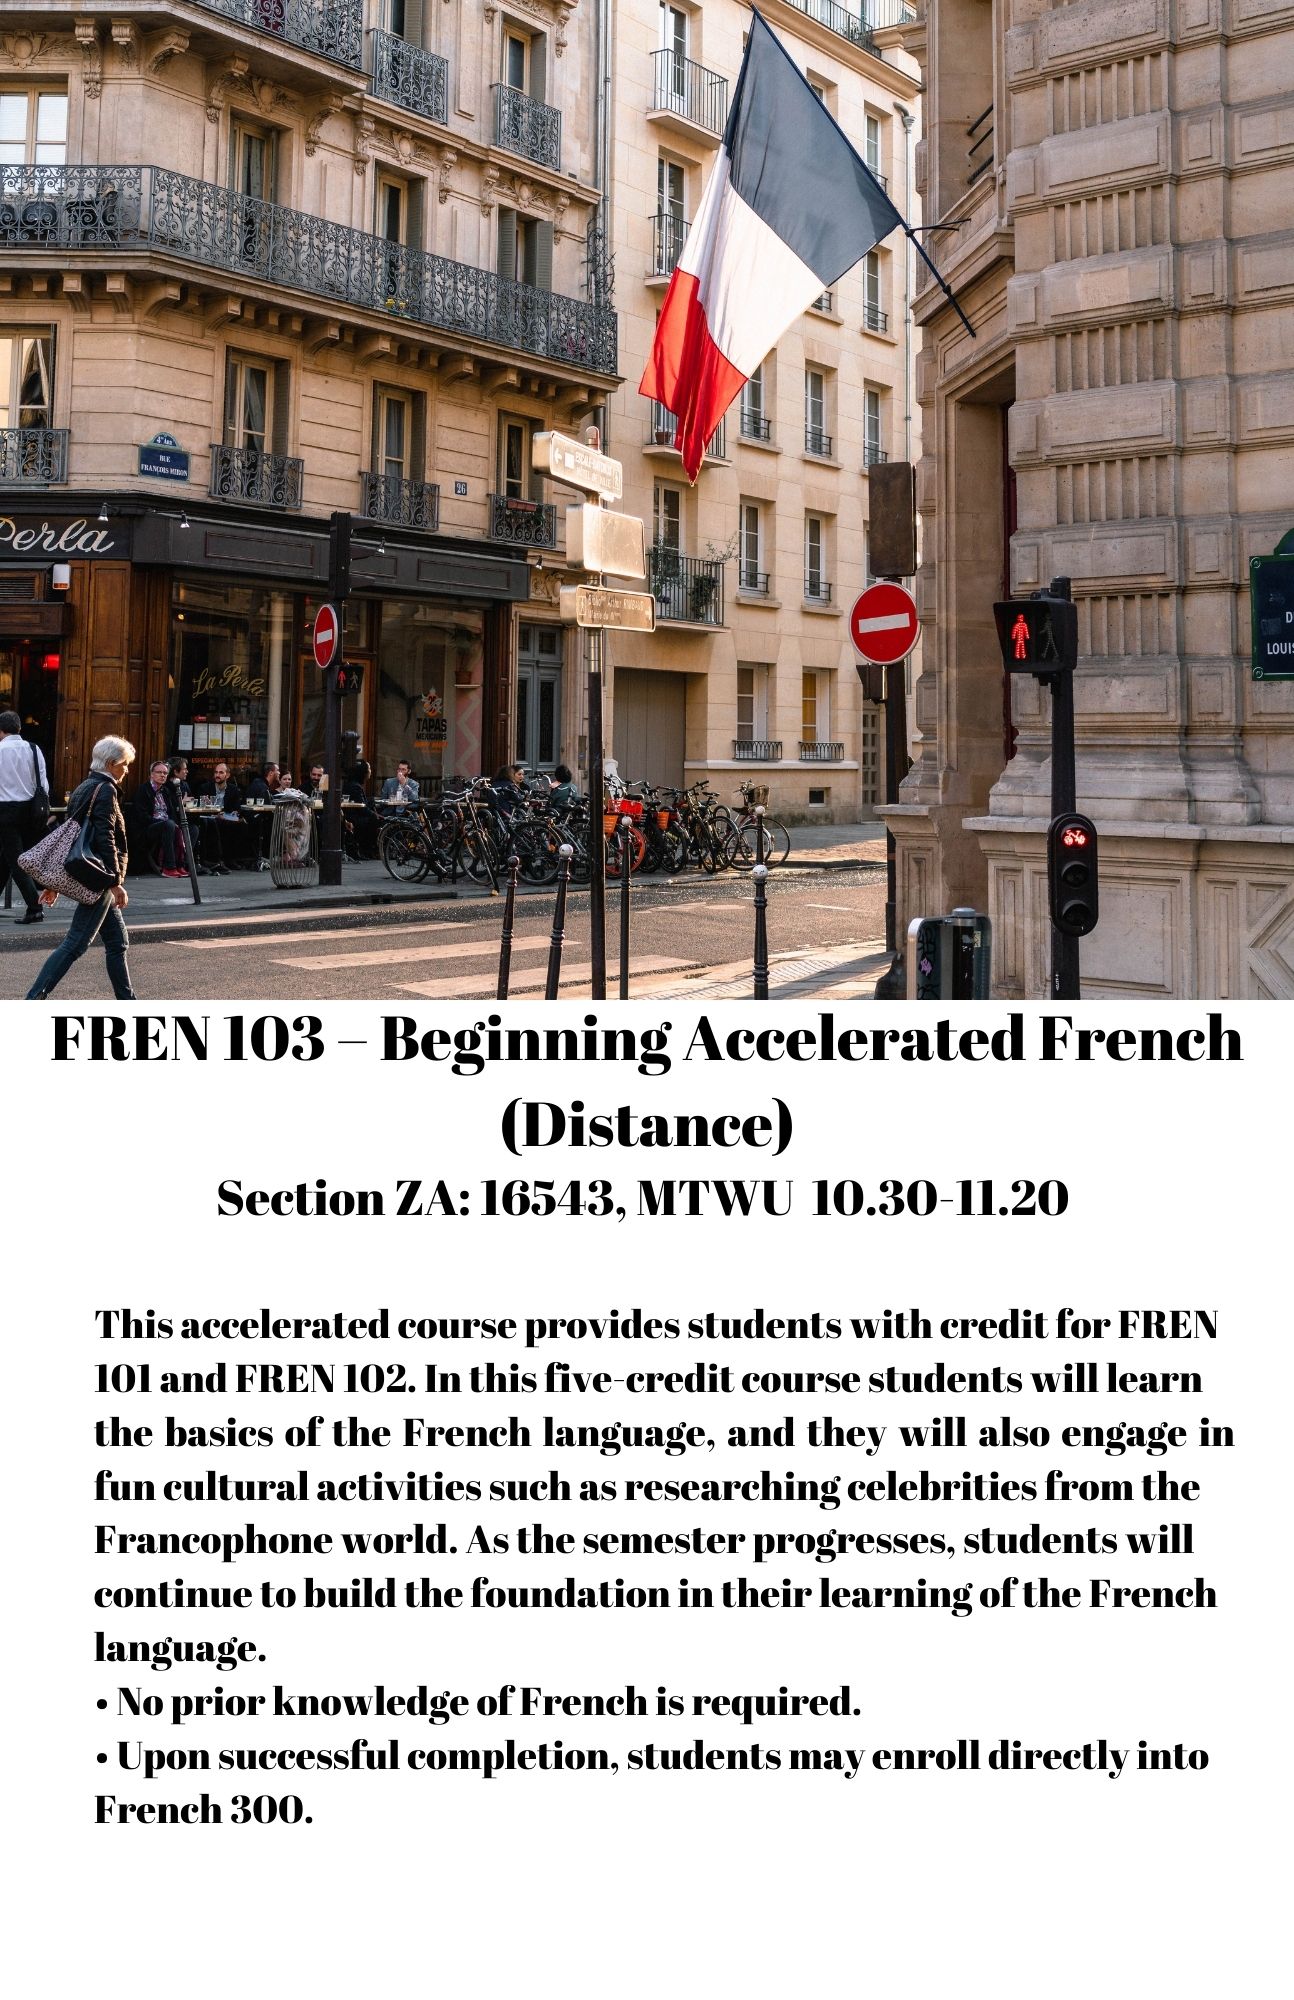 FREN 103 – Beginning Accelerated French(Distance) Section ZA: 16543, MTWU 10.30-11.20 This accelerated course provides students with credit for FREN 101 and FREN 102. In this five-credit course students will learn the basics of the French language, and they will also engage infun cultural activities such as researching celebrities from the Francophone world. As the semester progresses, students will continue to build the foundation in their learning of the French language. • No prior knowledge of French is required. • Upon successful completion, students may enroll directly into French 300.